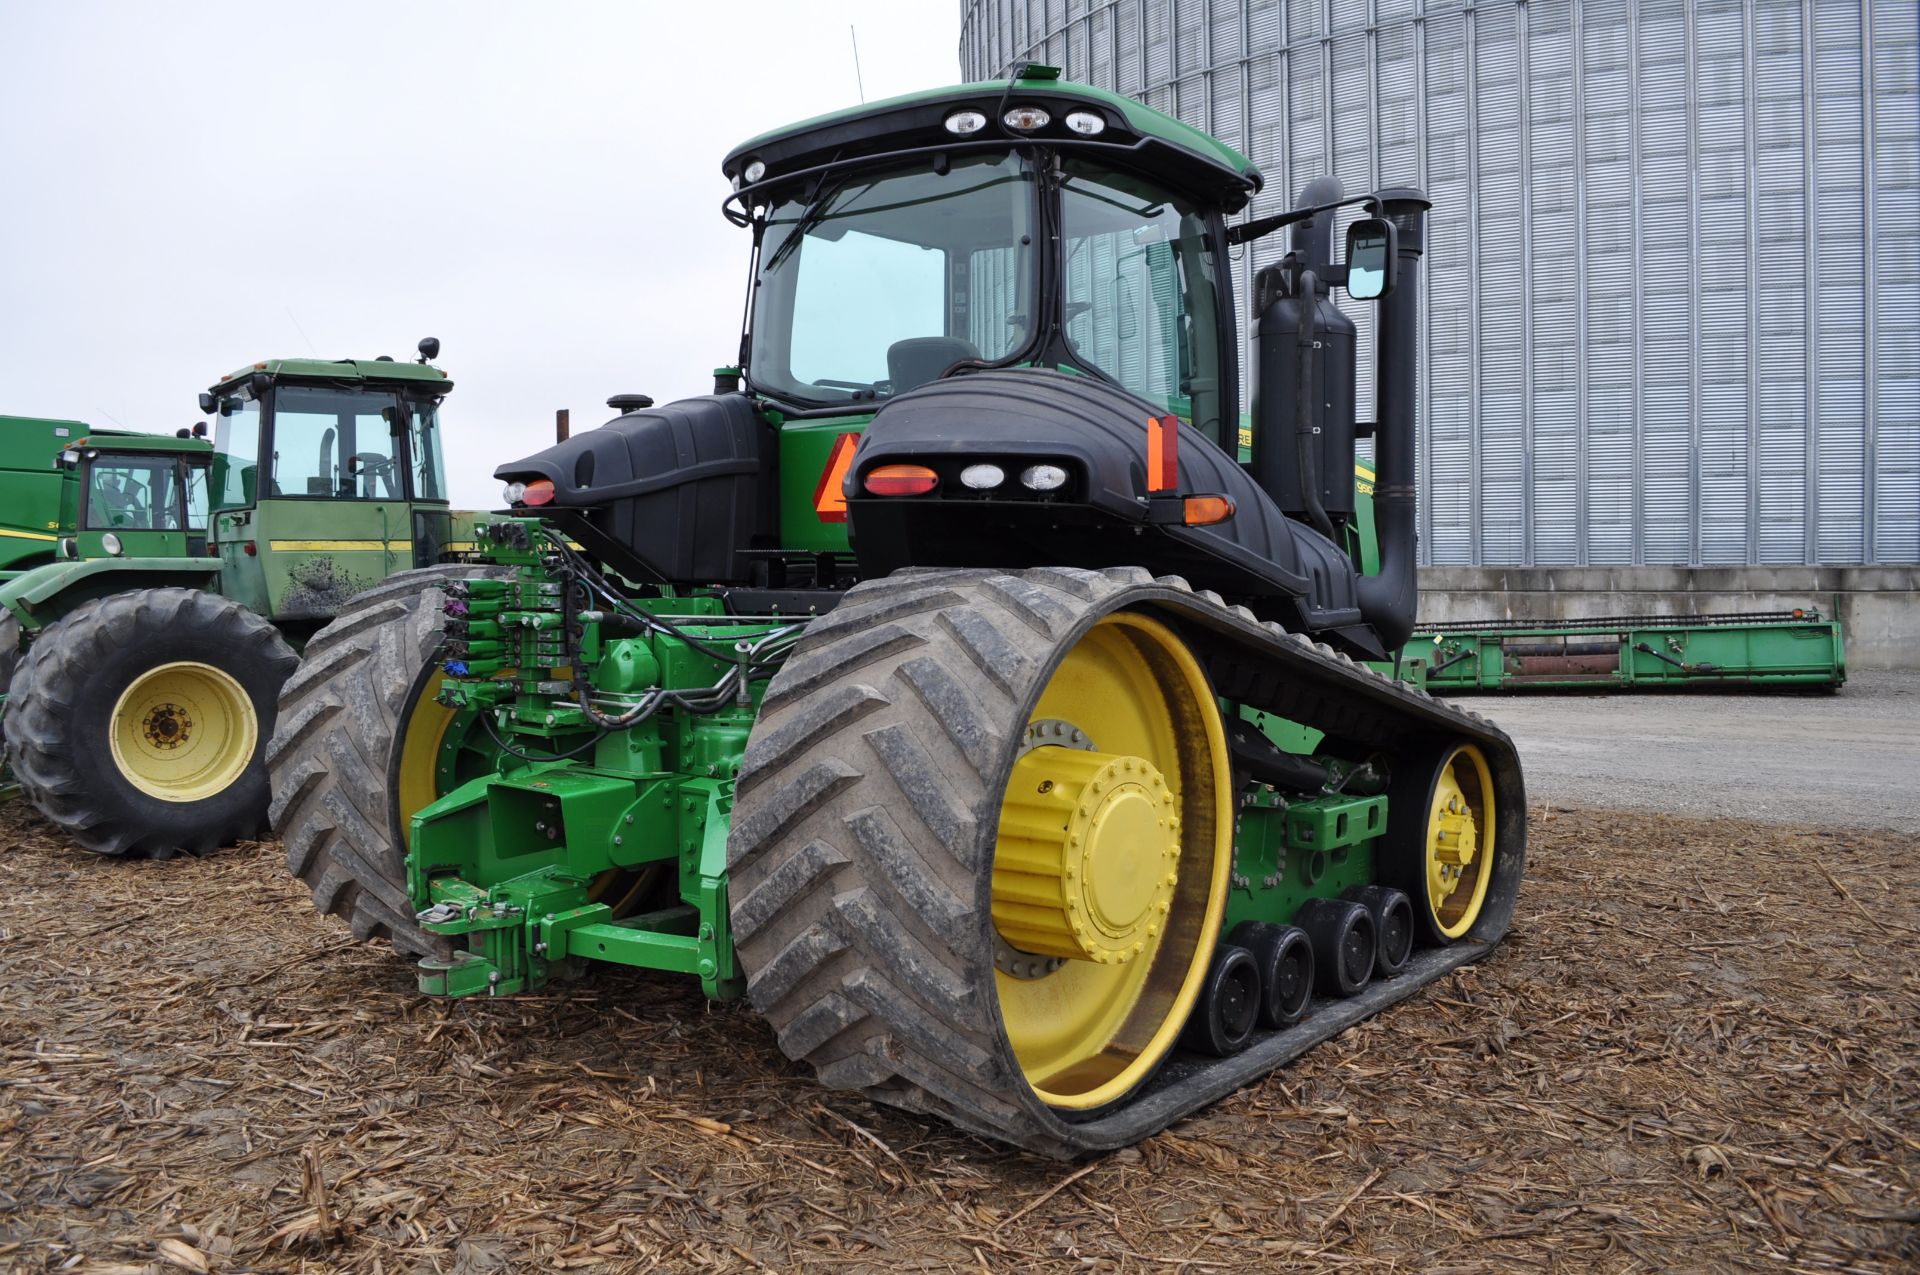 John Deere 9510RT track tractor, 36” belts, front weights, Powershift, 6 hyd remotes, 1000 PTO - Image 3 of 37